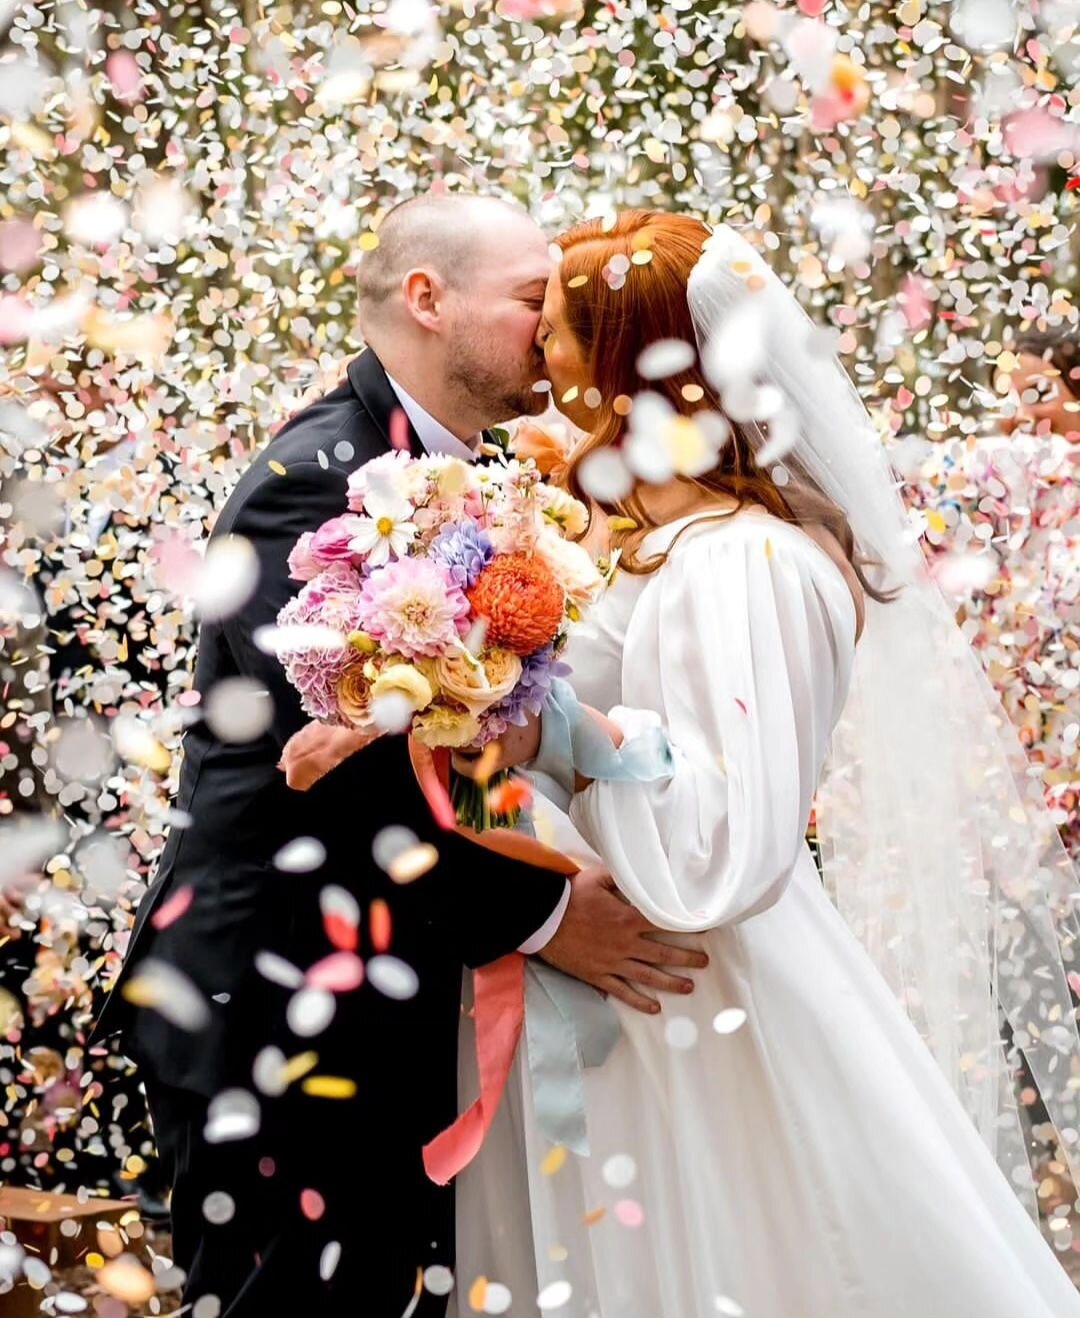 I am still blown away by this confetti shot of my gorgeous couple T &amp; L on Friday.  Truly fabulous 🎊 

@ashhughesweddings you are an absolute magician capturing this moment, as confetti drifted all around not only the bride &amp; groom, but also